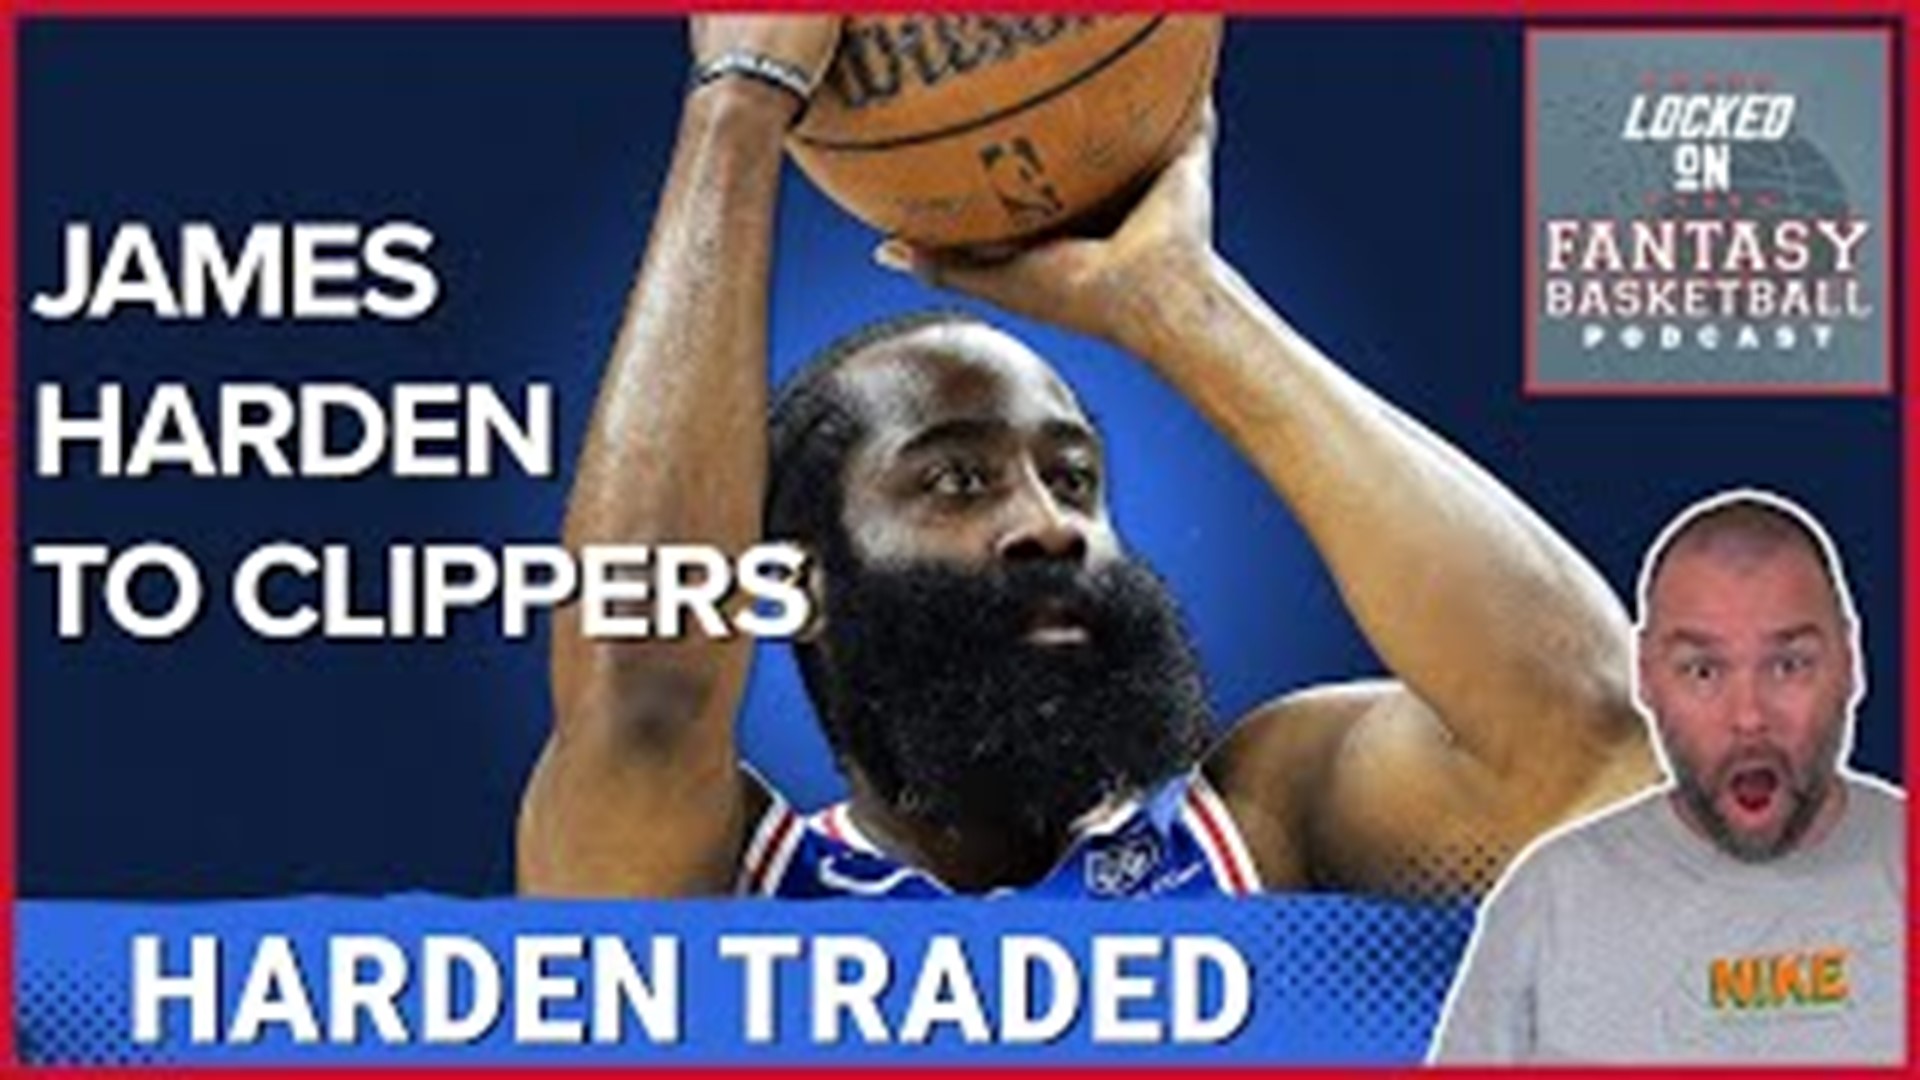 In a seismic shift, James Harden finds a new home with the LA Clippers. In this breaking news episode, Josh Lloyd takes a detailed look at the blockbuster trade